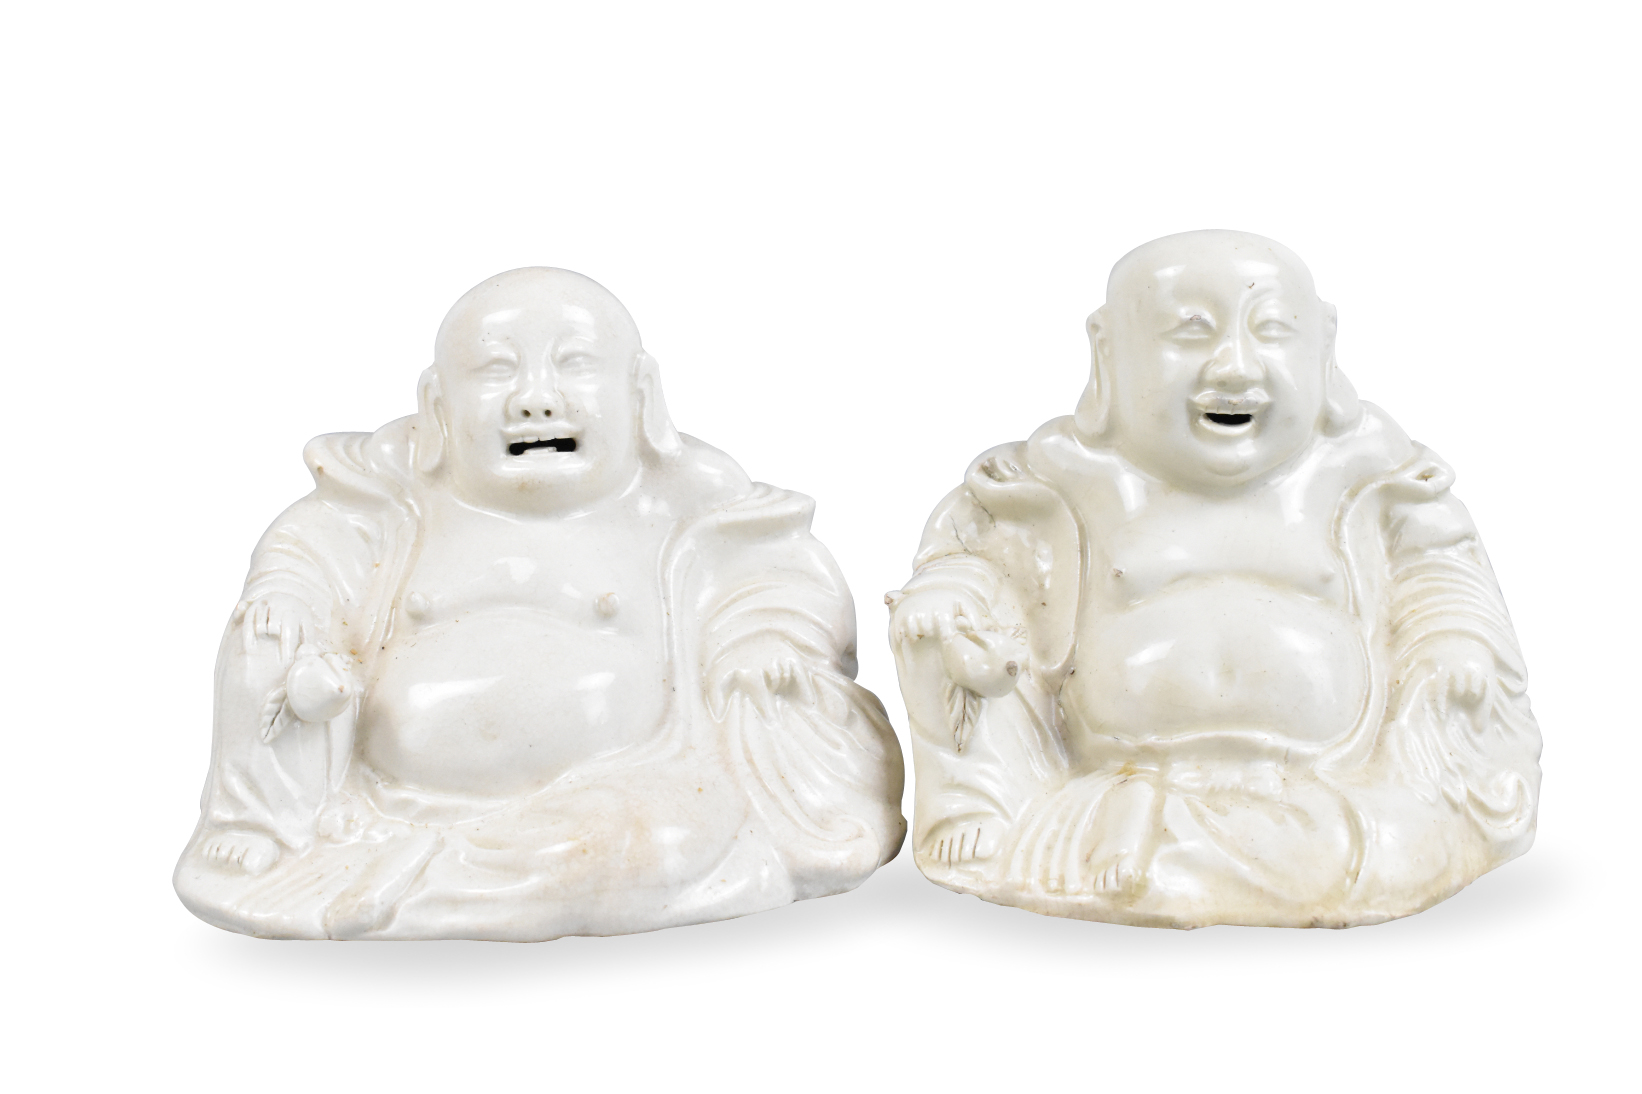 PAIR OF CHINESE GE GLAZED LAUGHING 33a614